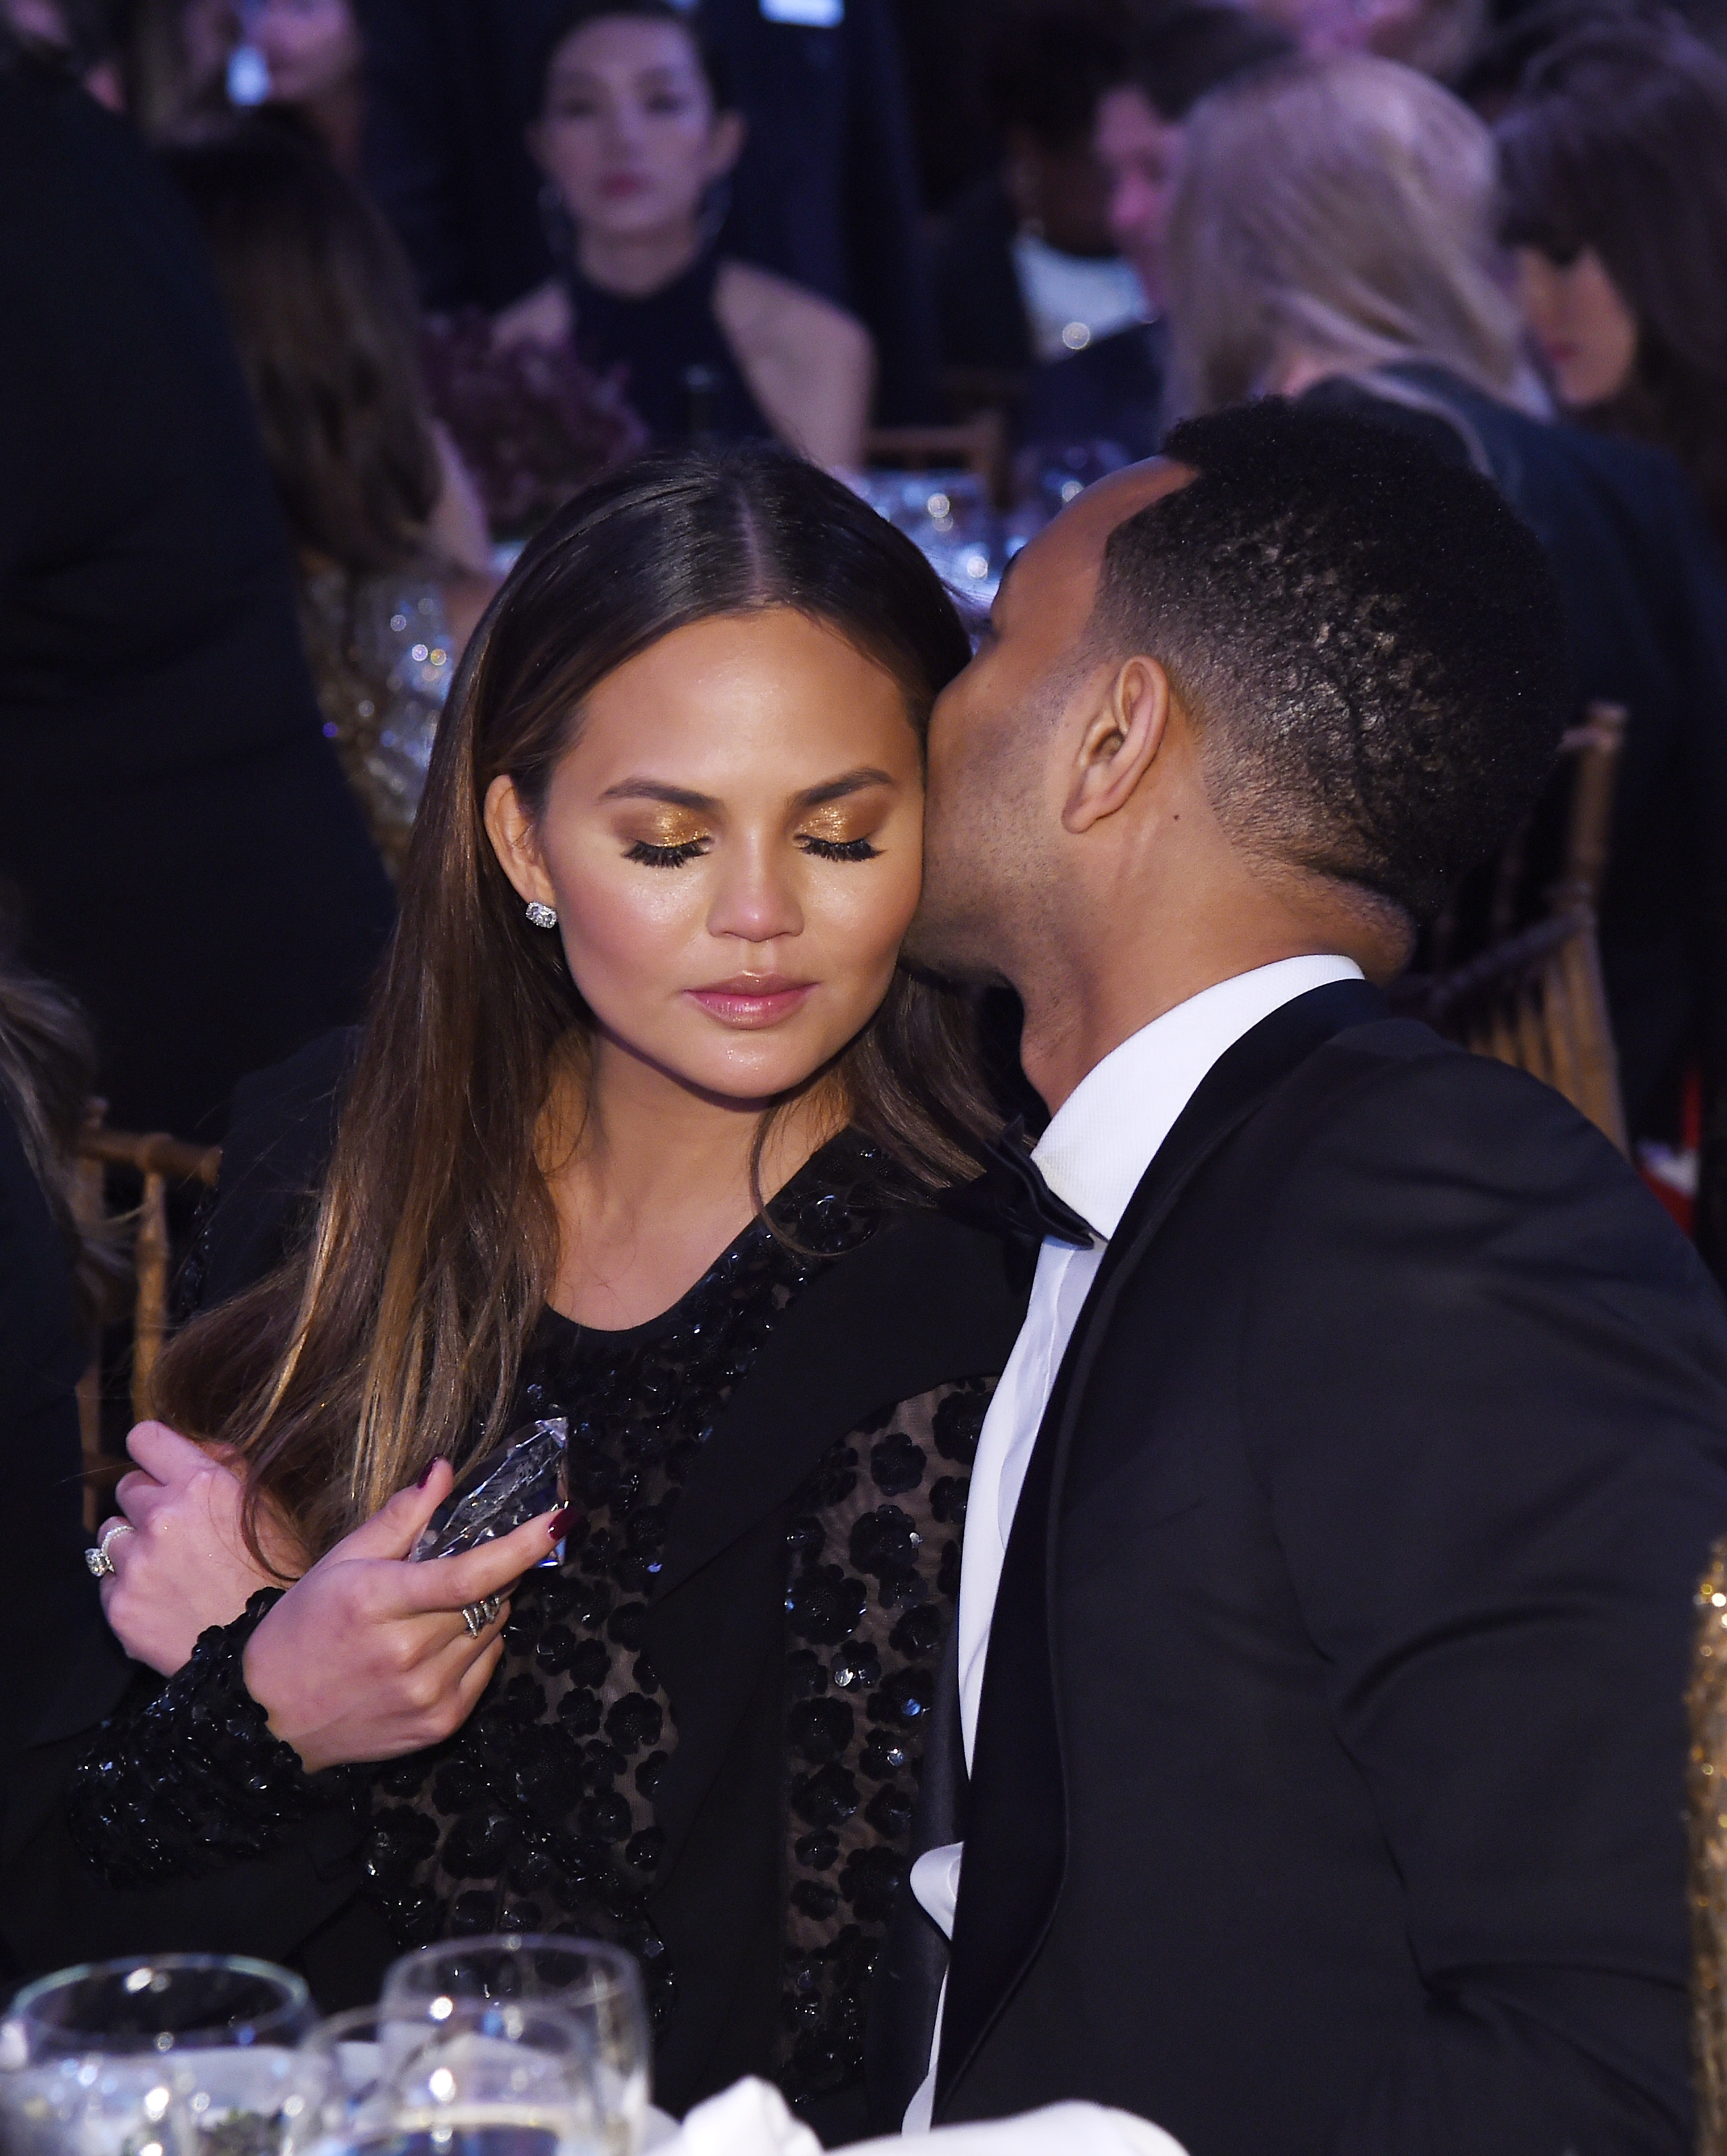 Chrissy Teigen and John Legend at the God's Love We Deliver Golden Heart Awards in New York City, 2016. | Source: Getty Images